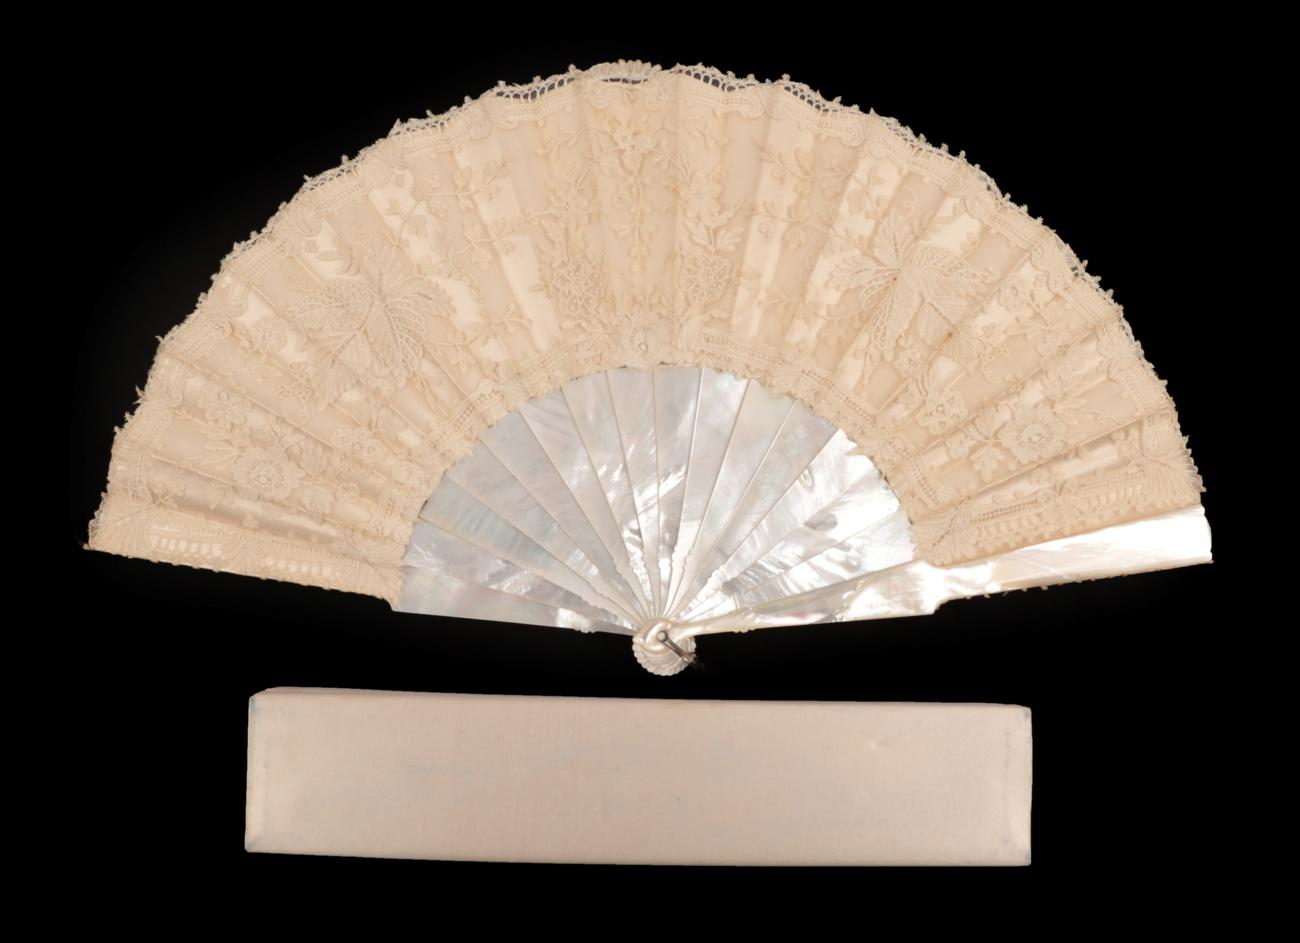 Lot 2124 - A Good Mixed Brussels Appliqué Lace Fan, the monture of white mother of pearl with some attractive